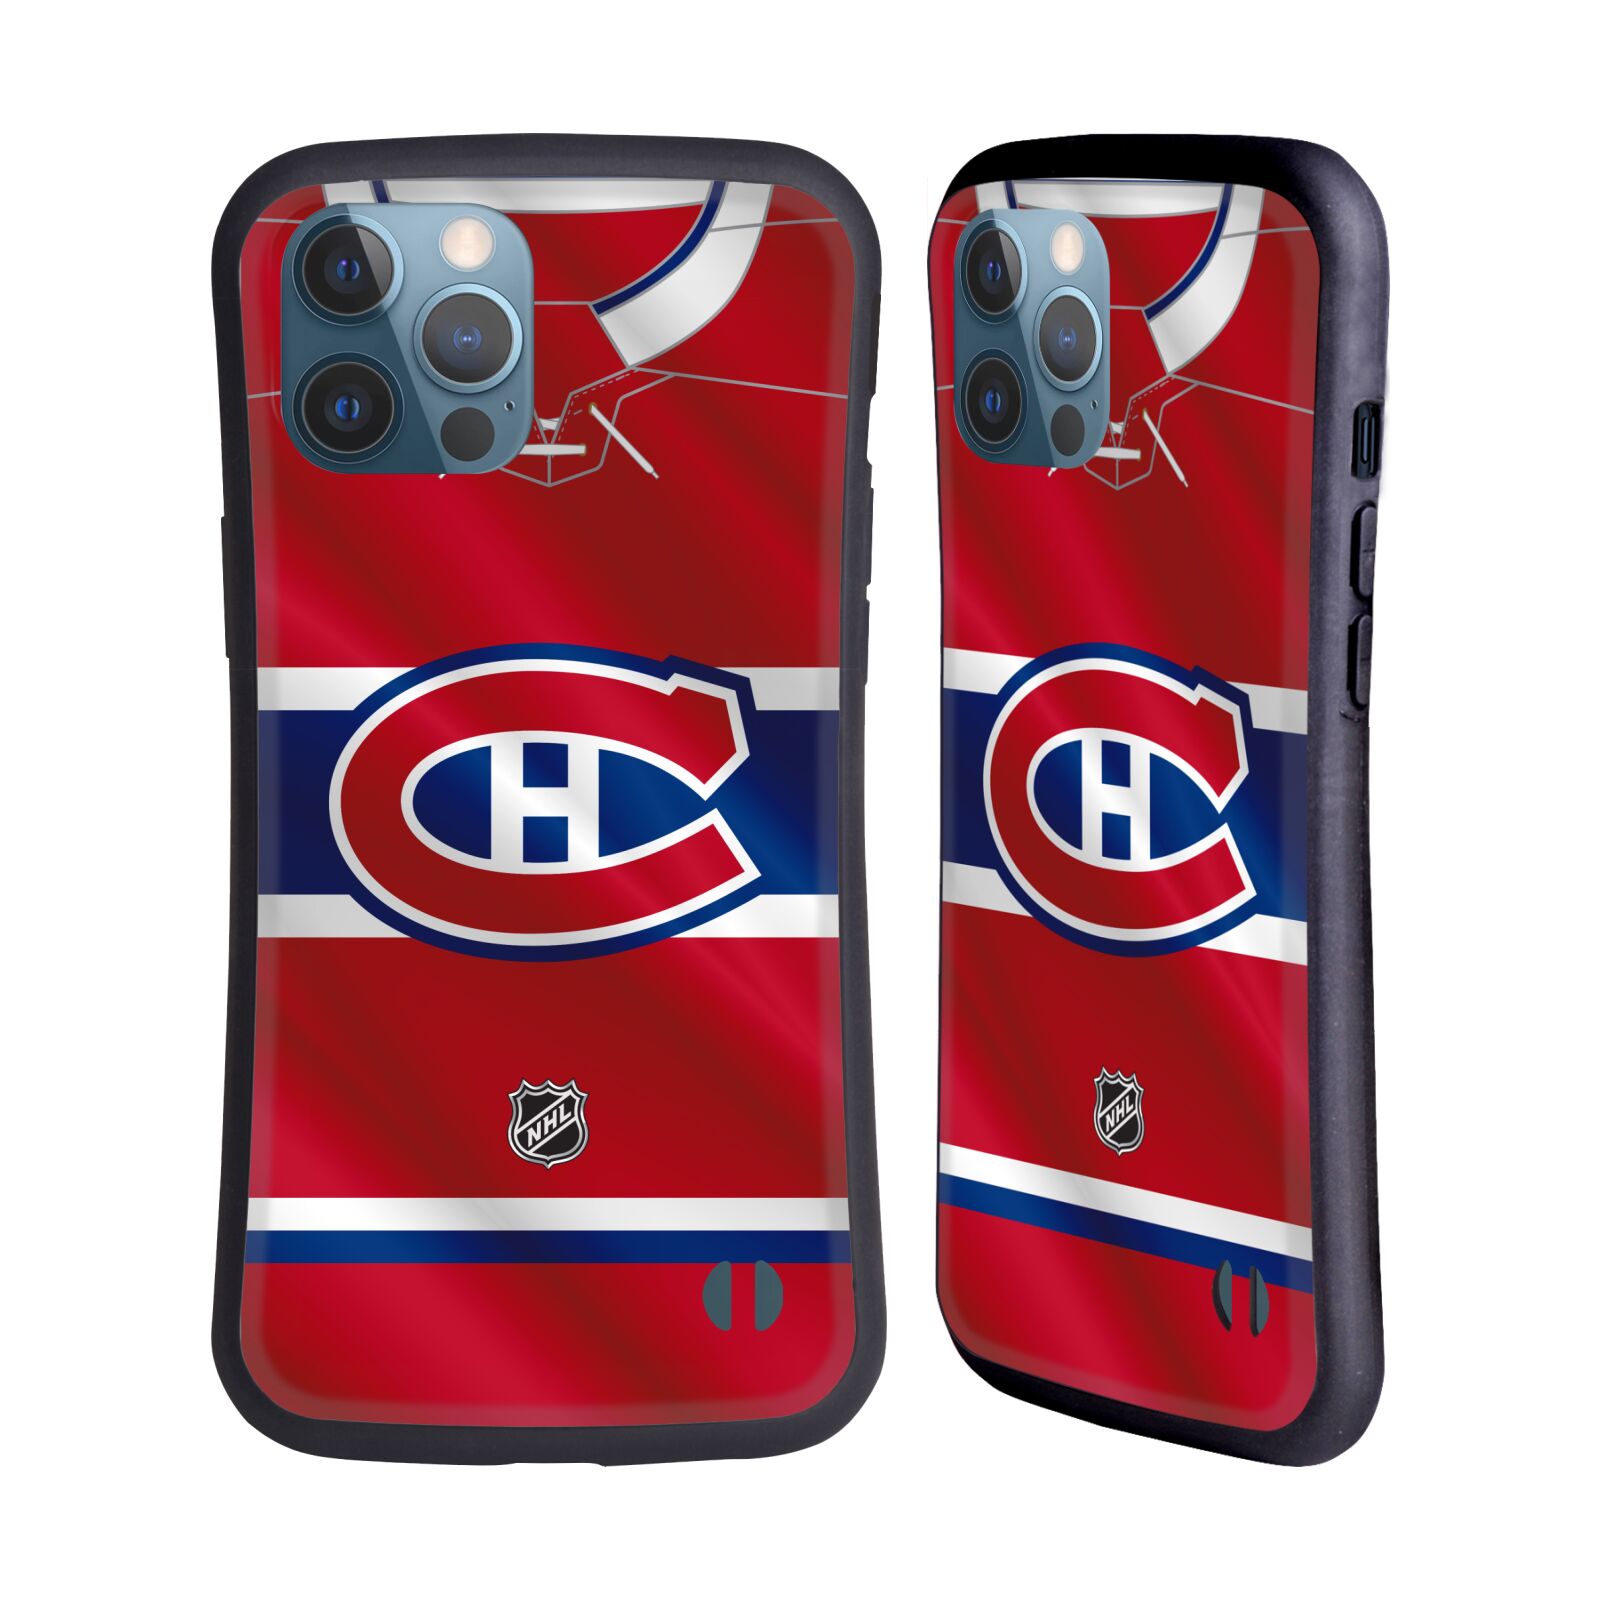 Obal na mobil Apple iPhone 12 PRO MAX - HEAD CASE - NHL - Montreal Canadiens - znak dres